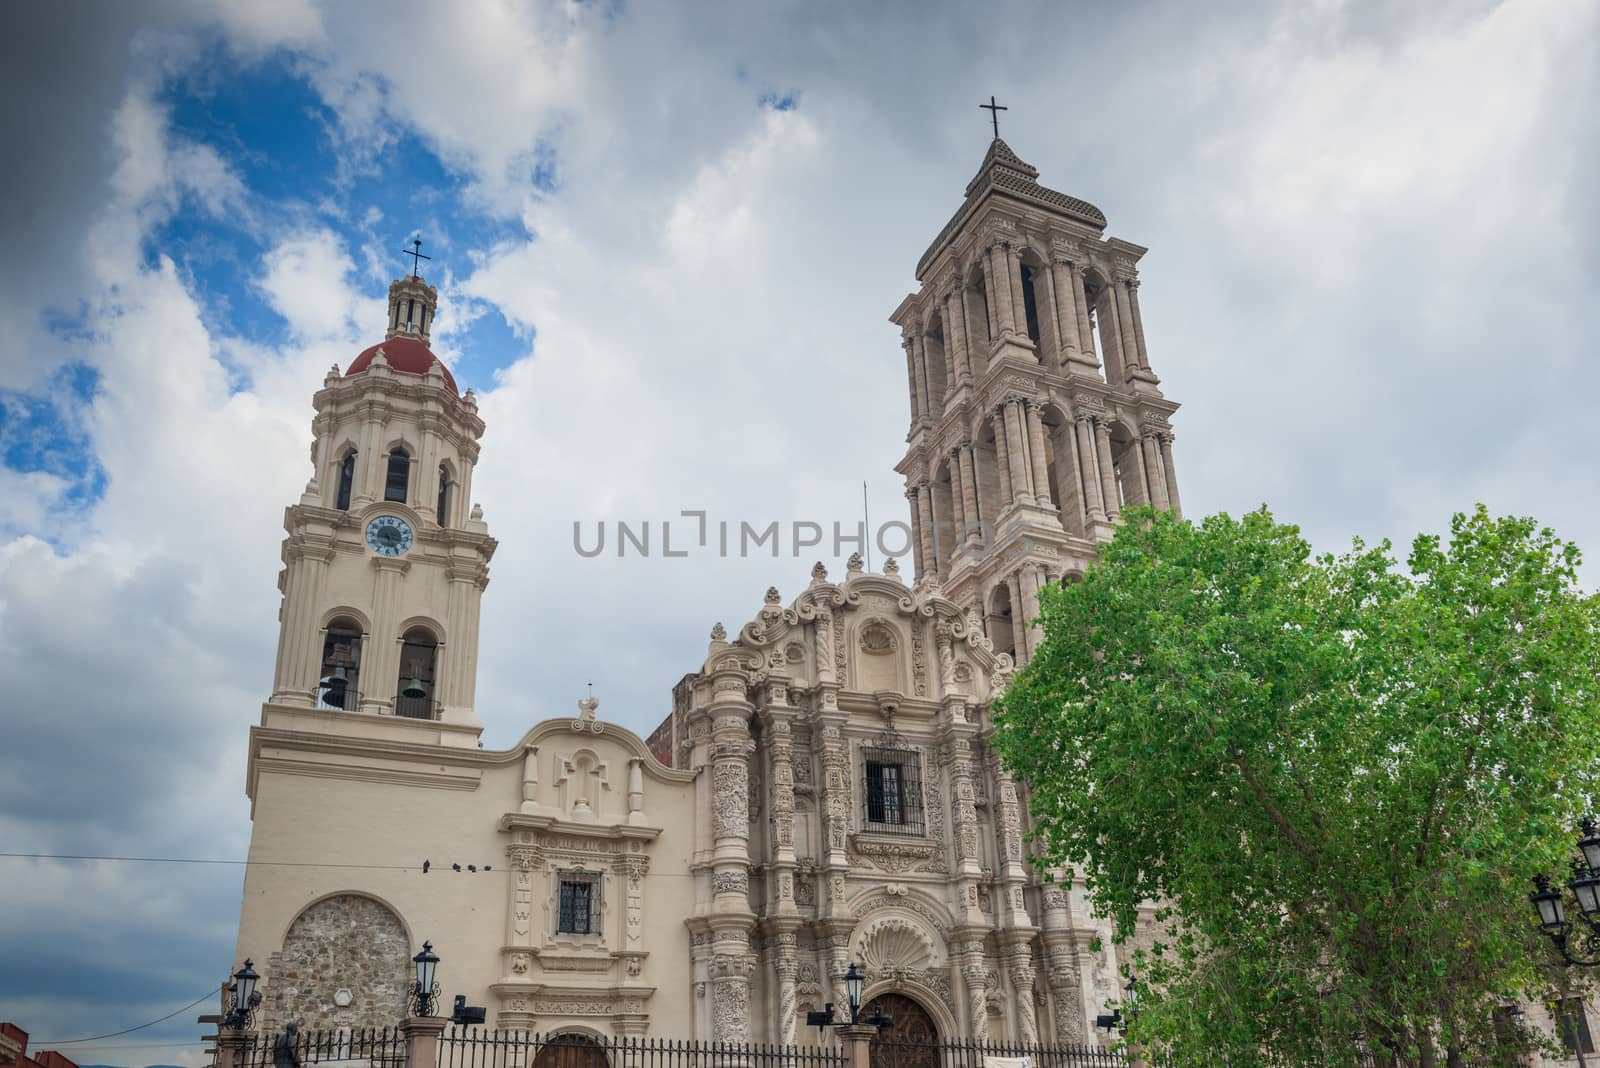 This is the very lovely Catedral de Santiago.The front facade is very exuberant and baroque. It has beautifully carved heavy wooden doors in the front. Inside the church has a single aisle and is mostly neo-classical with a central dome and real transepts. In the transepts, however, the neo-classical gives way to more baroque with gilded altars.